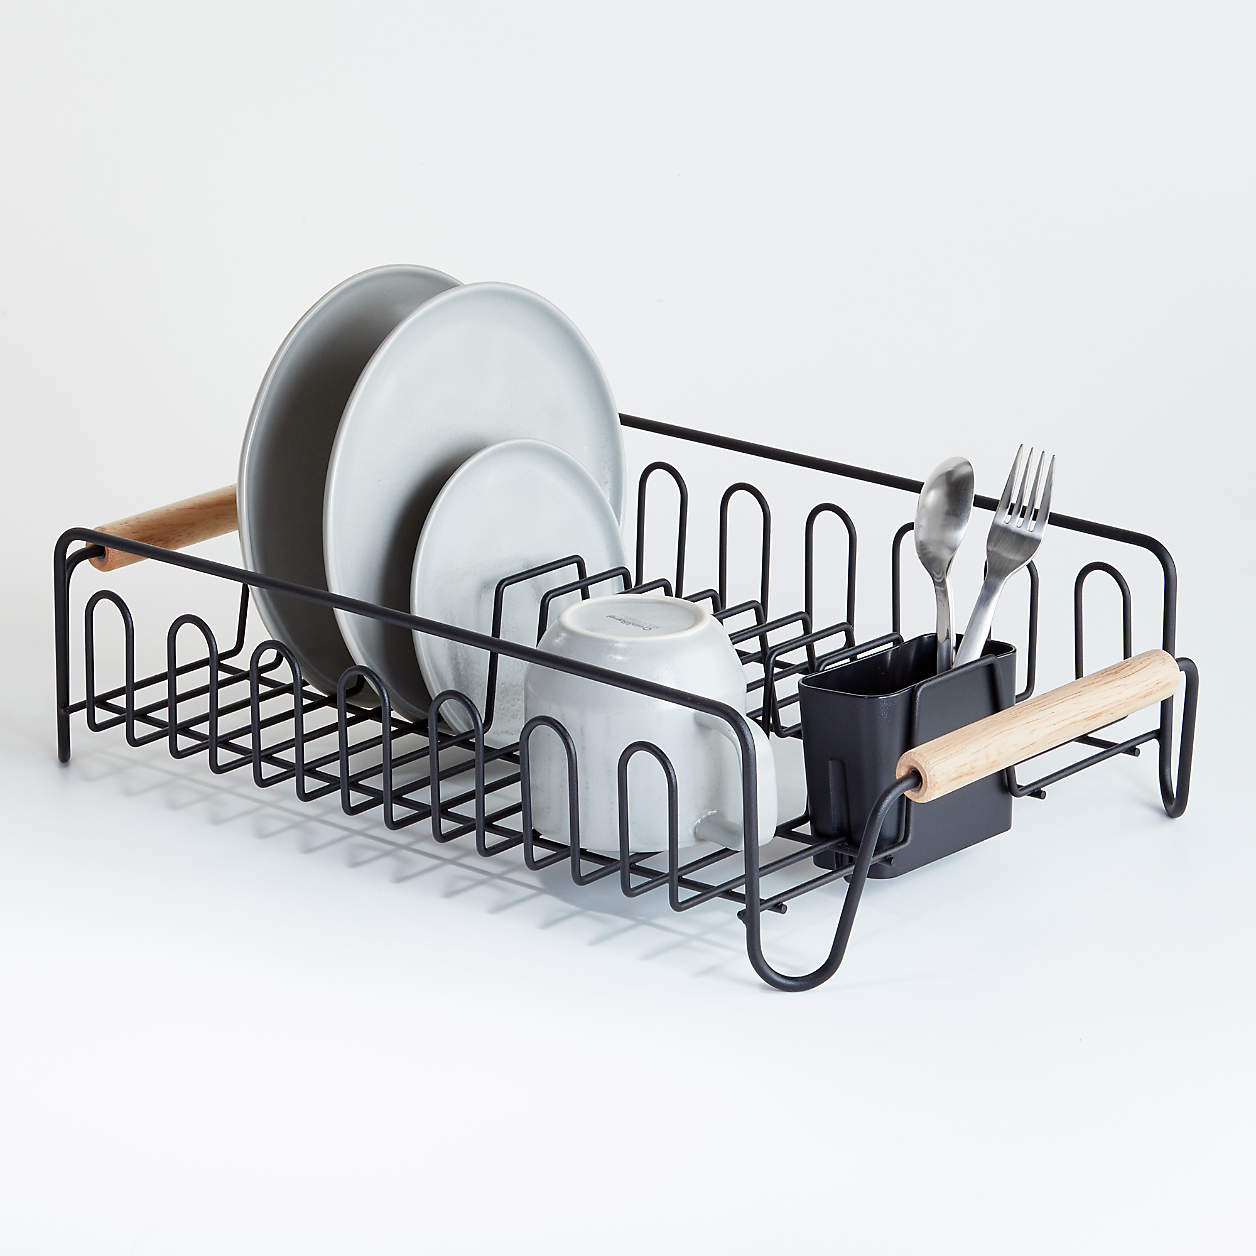 coobest Dish Drying Rack, Dish Racks for Kitchen Counter with